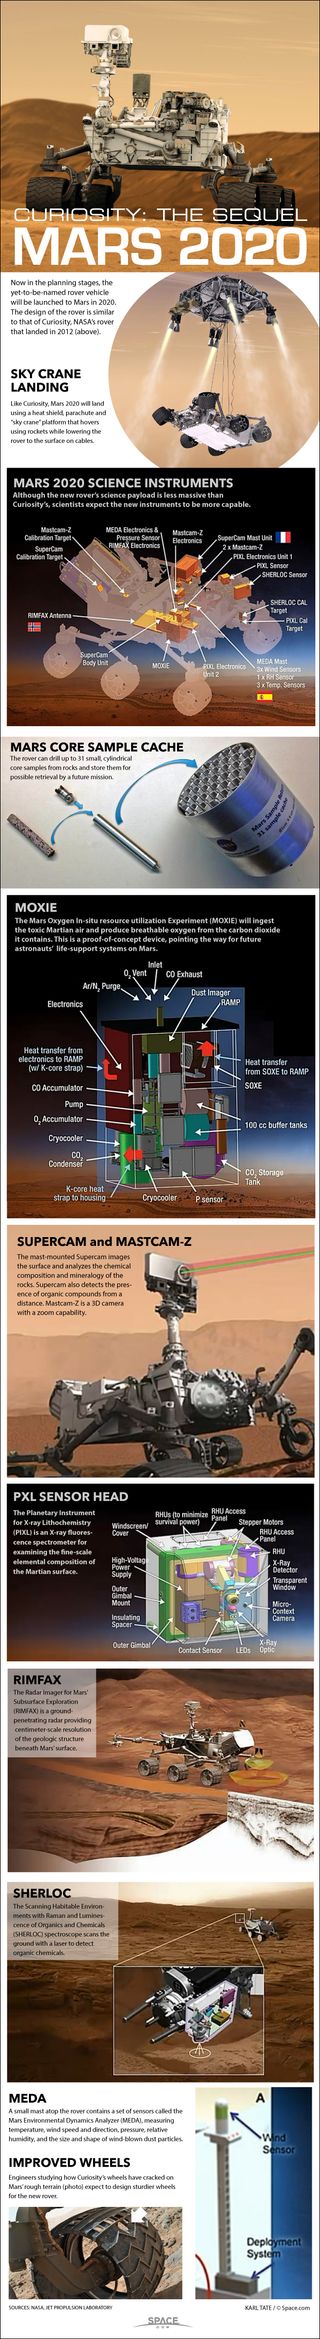 NASA's Mars 2020 mission will send a car-size rover to the Red Planet to collect samples. See how the Mars 2020 rover will work in this Space.com infographic.